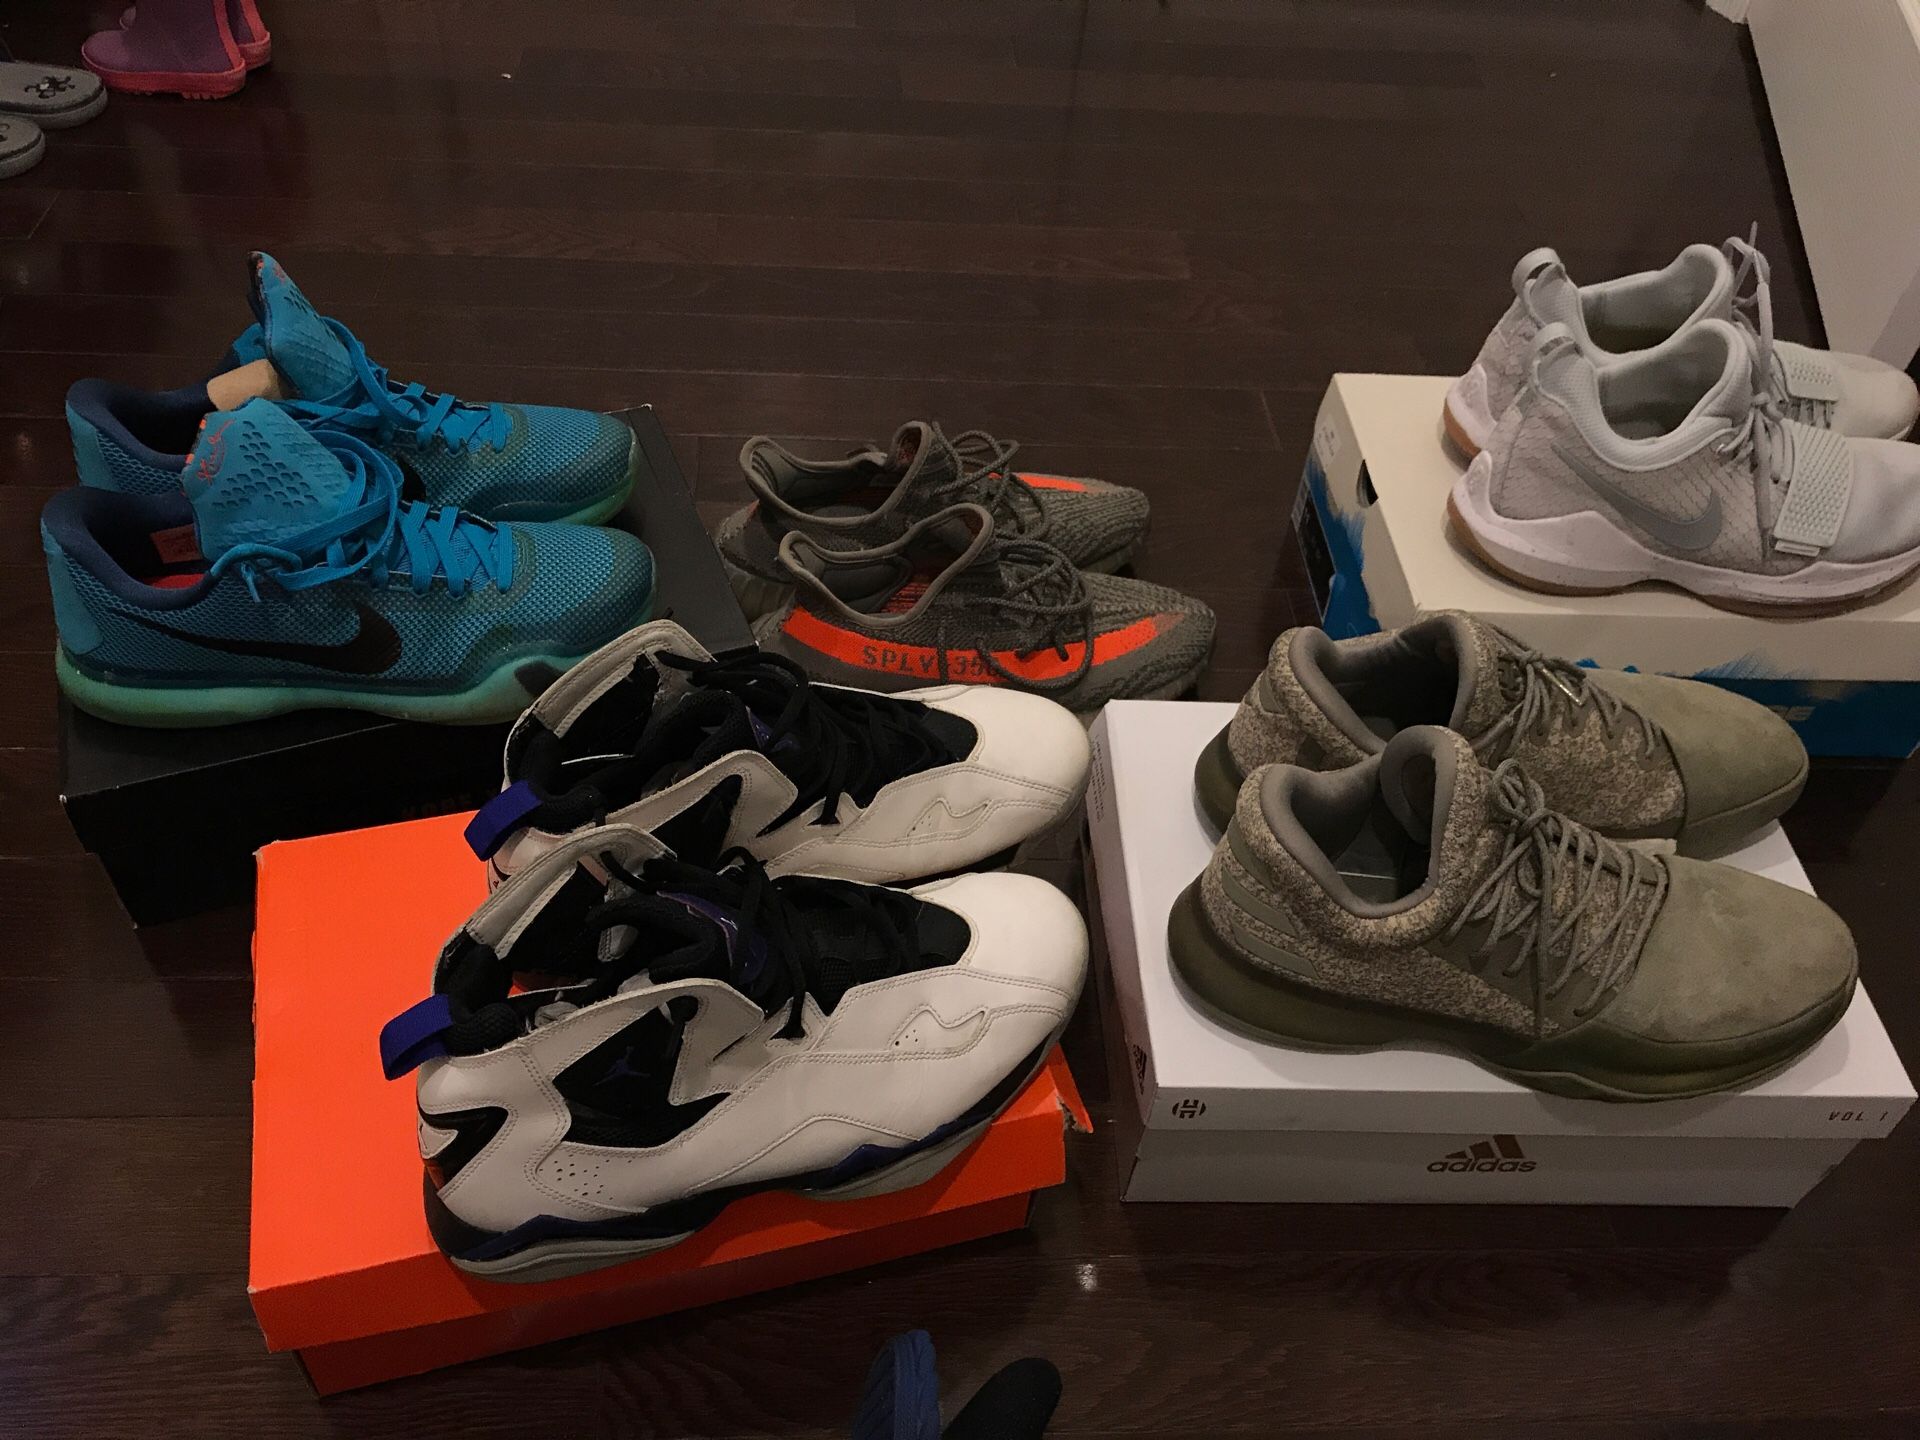 A set of sneakers, used, $350 for all of them